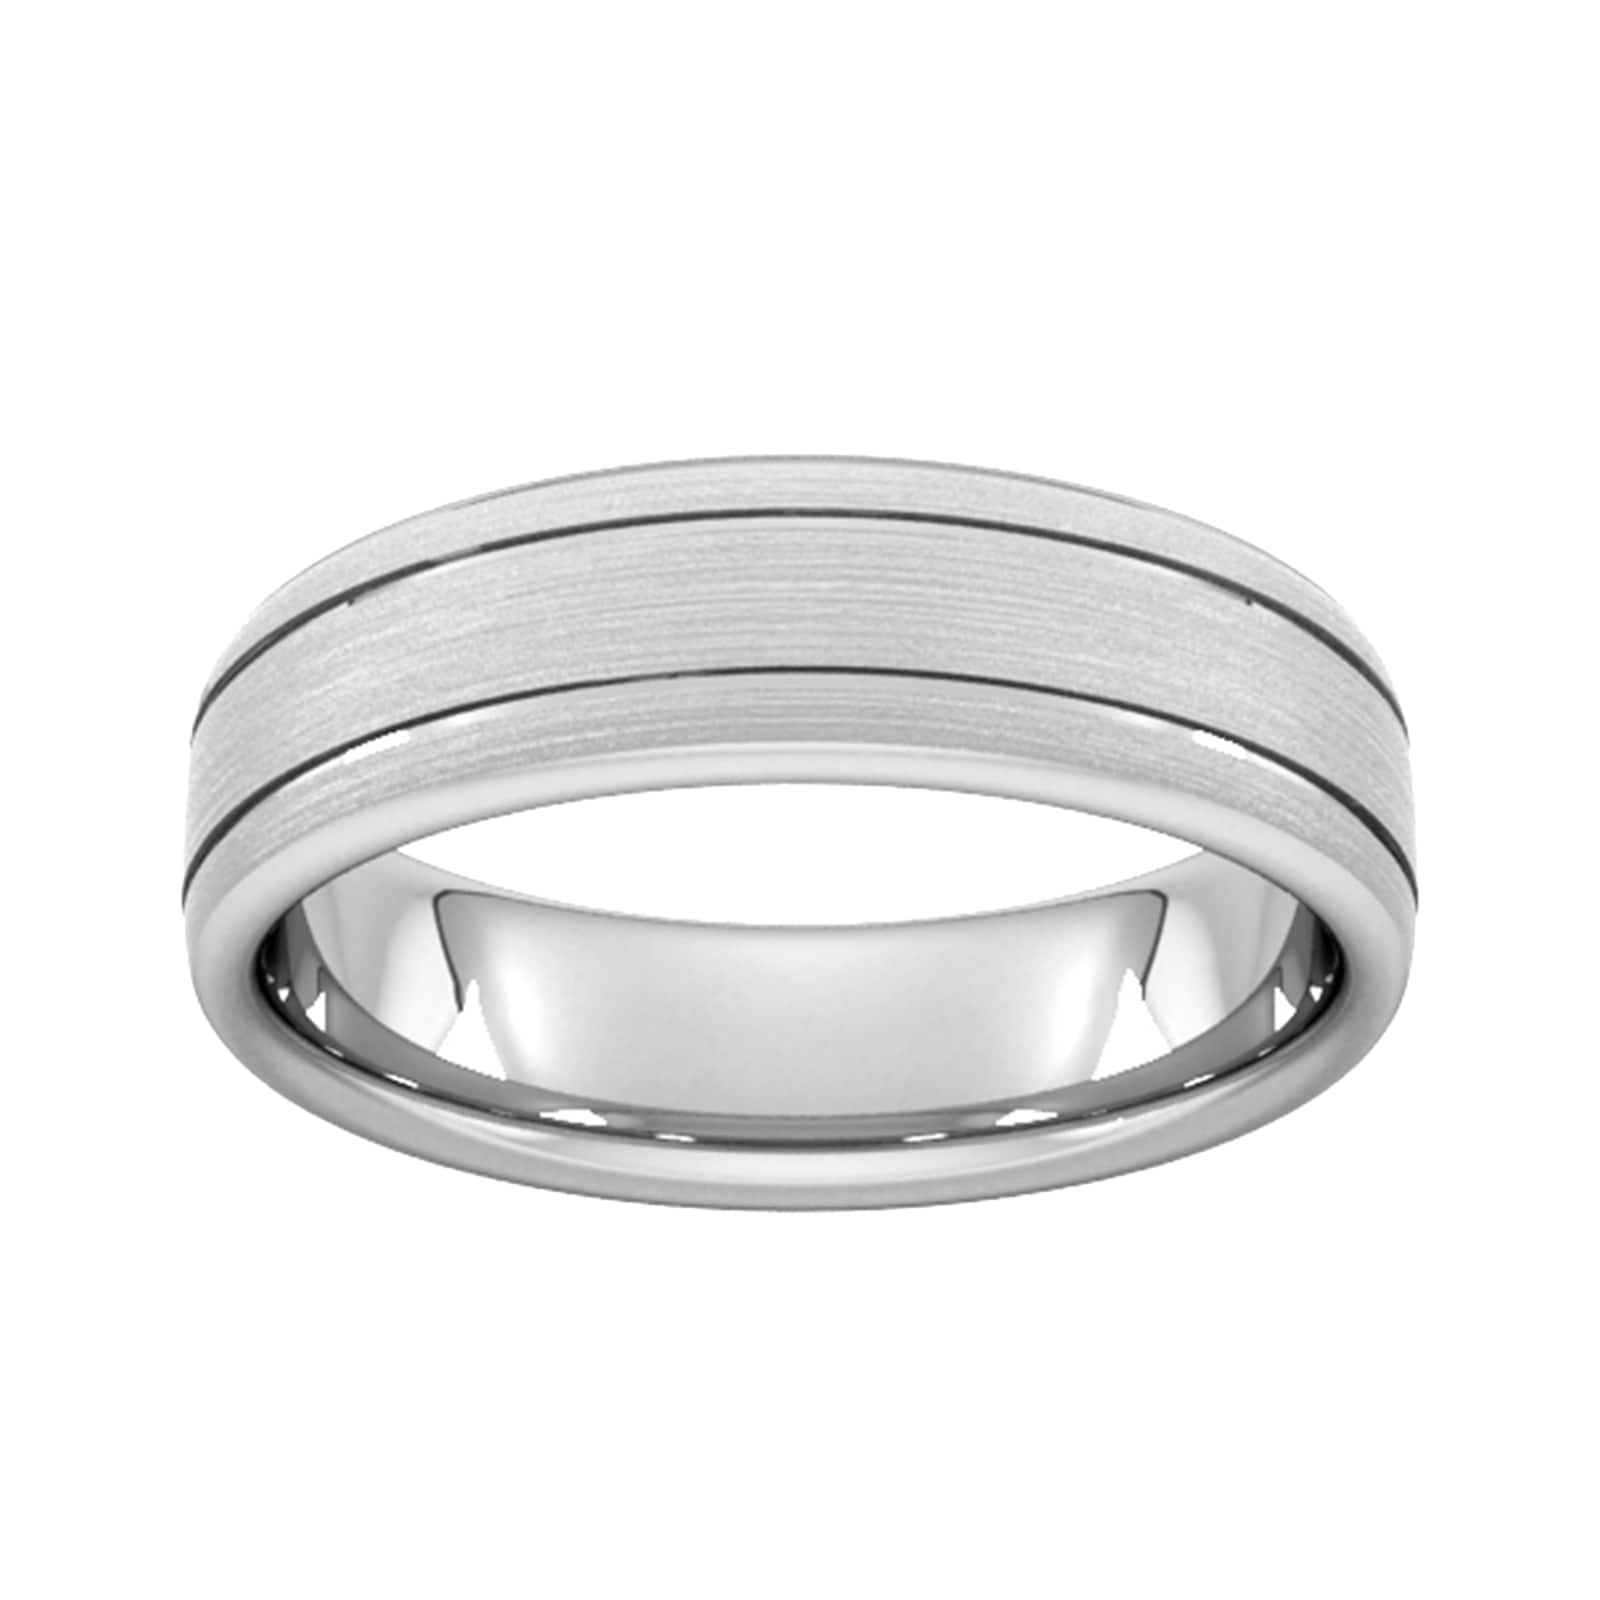 6mm Slight Court Extra Heavy Matt Finish With Double Grooves Wedding Ring In 9 Carat White Gold - Ring Size J